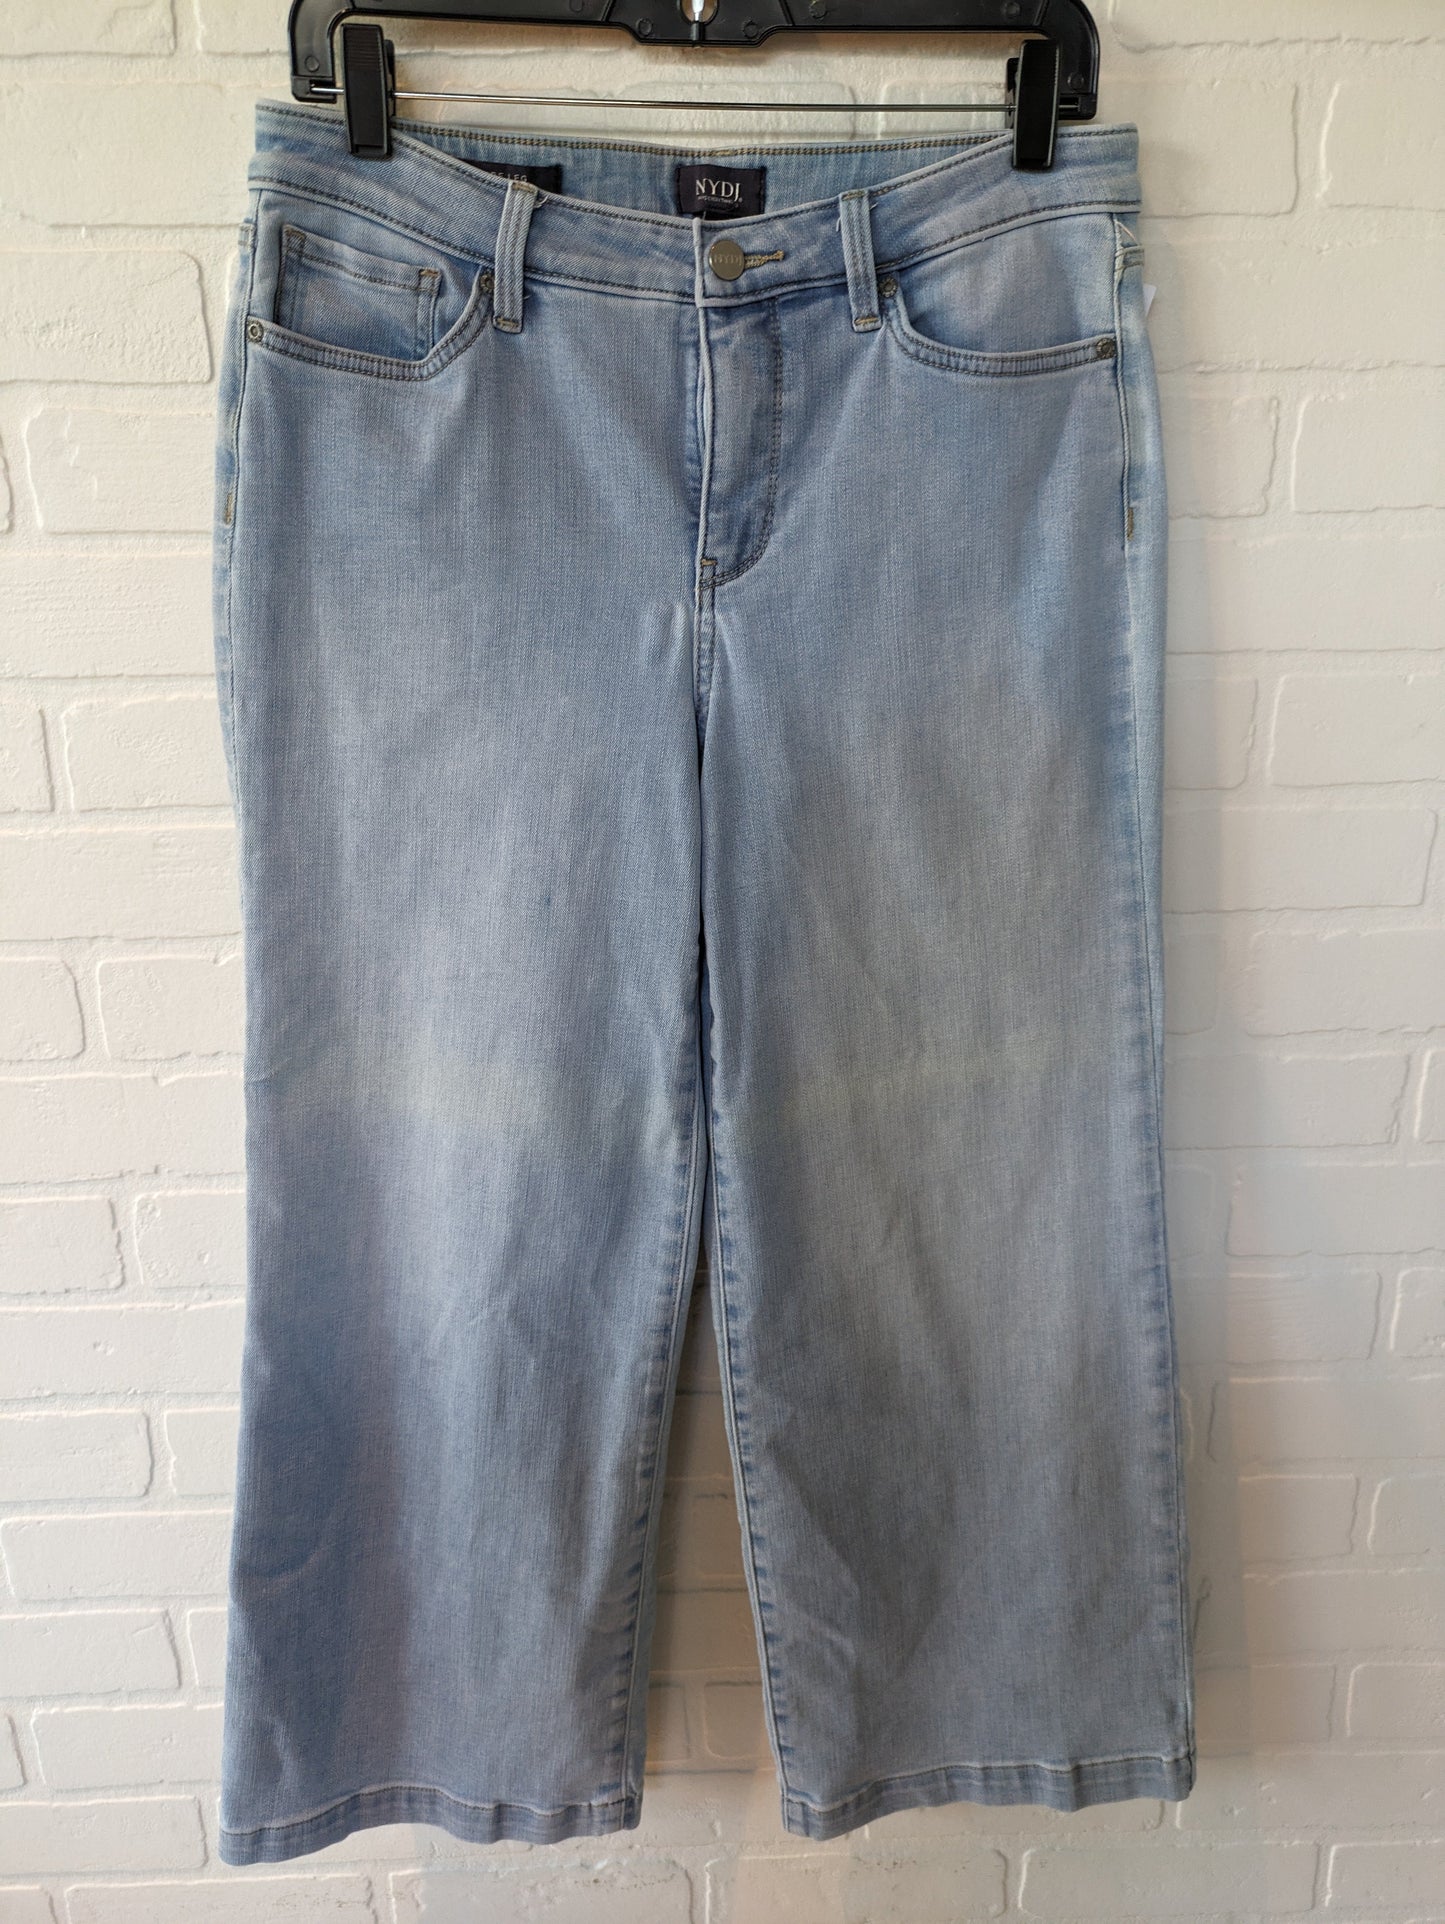 Blue Denim Jeans Wide Leg Not Your Daughters Jeans, Size 8